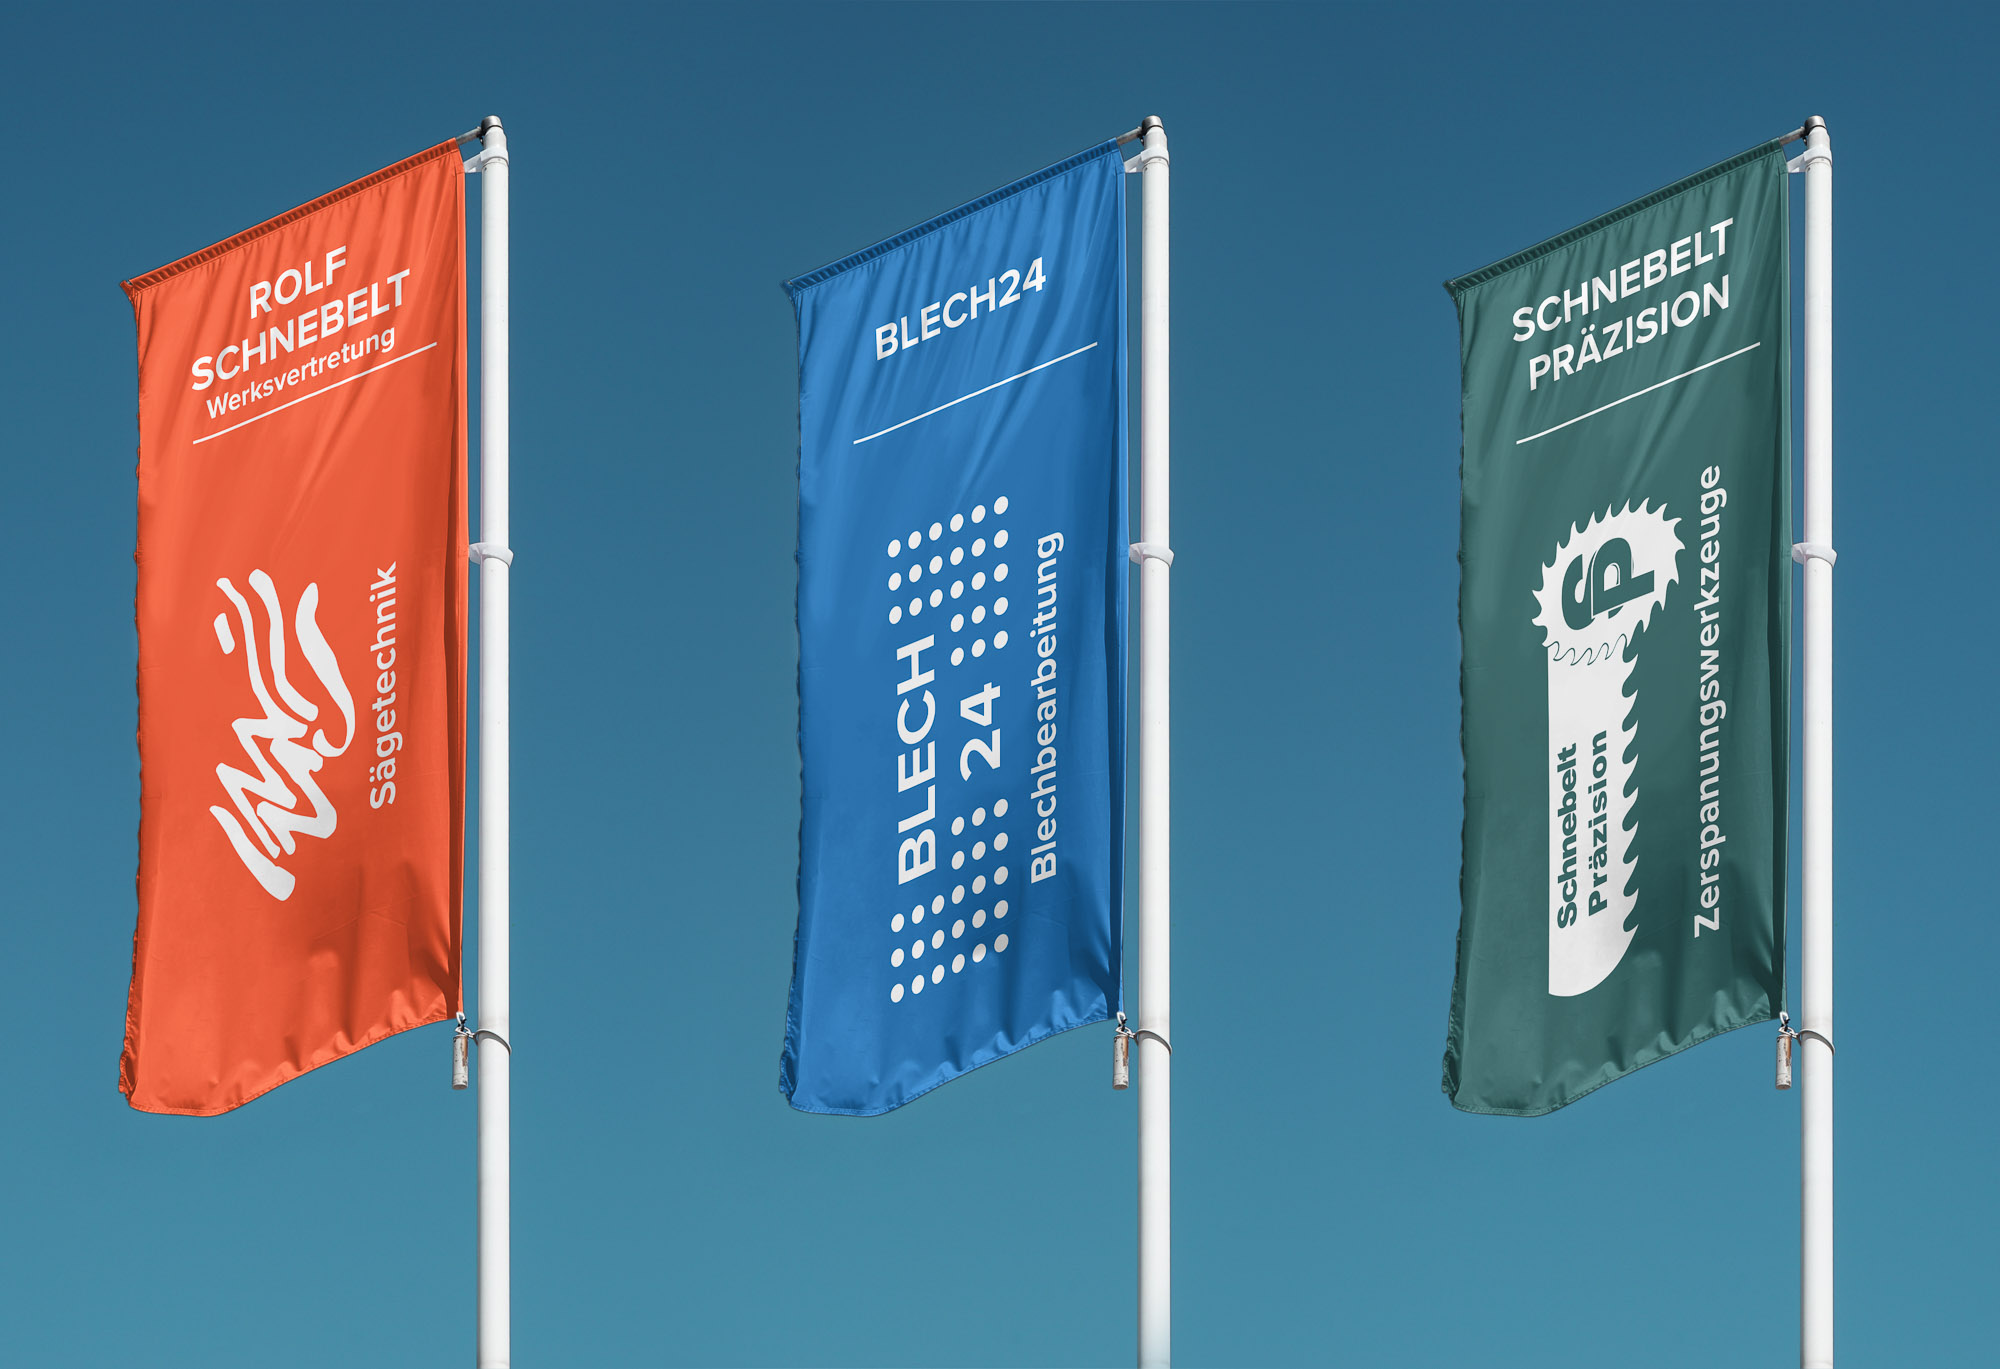 Schnebelt precision – advertising flags